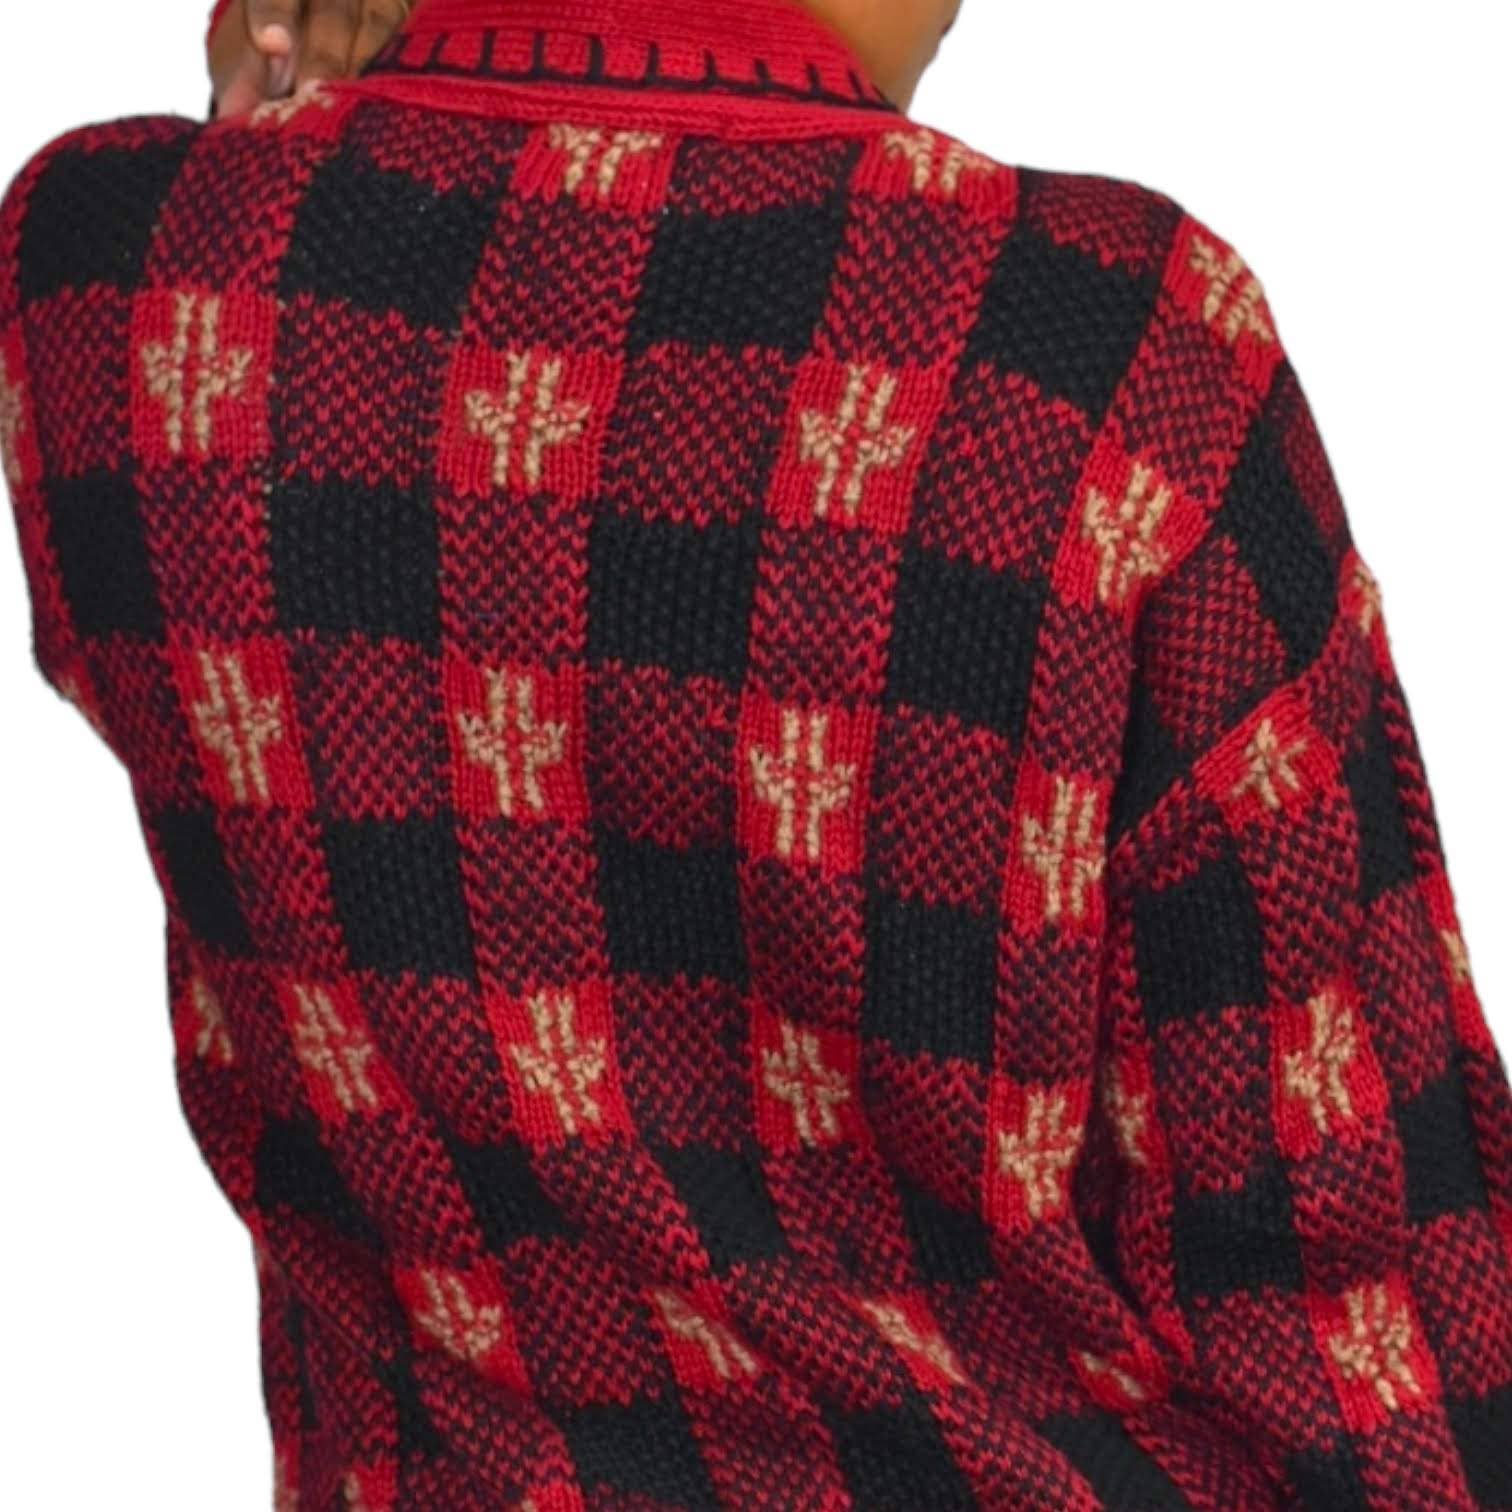 Vintage Ugly Sweater Hand Knit Cardigan Northern Isles Red Chunky Grandma Size Medium